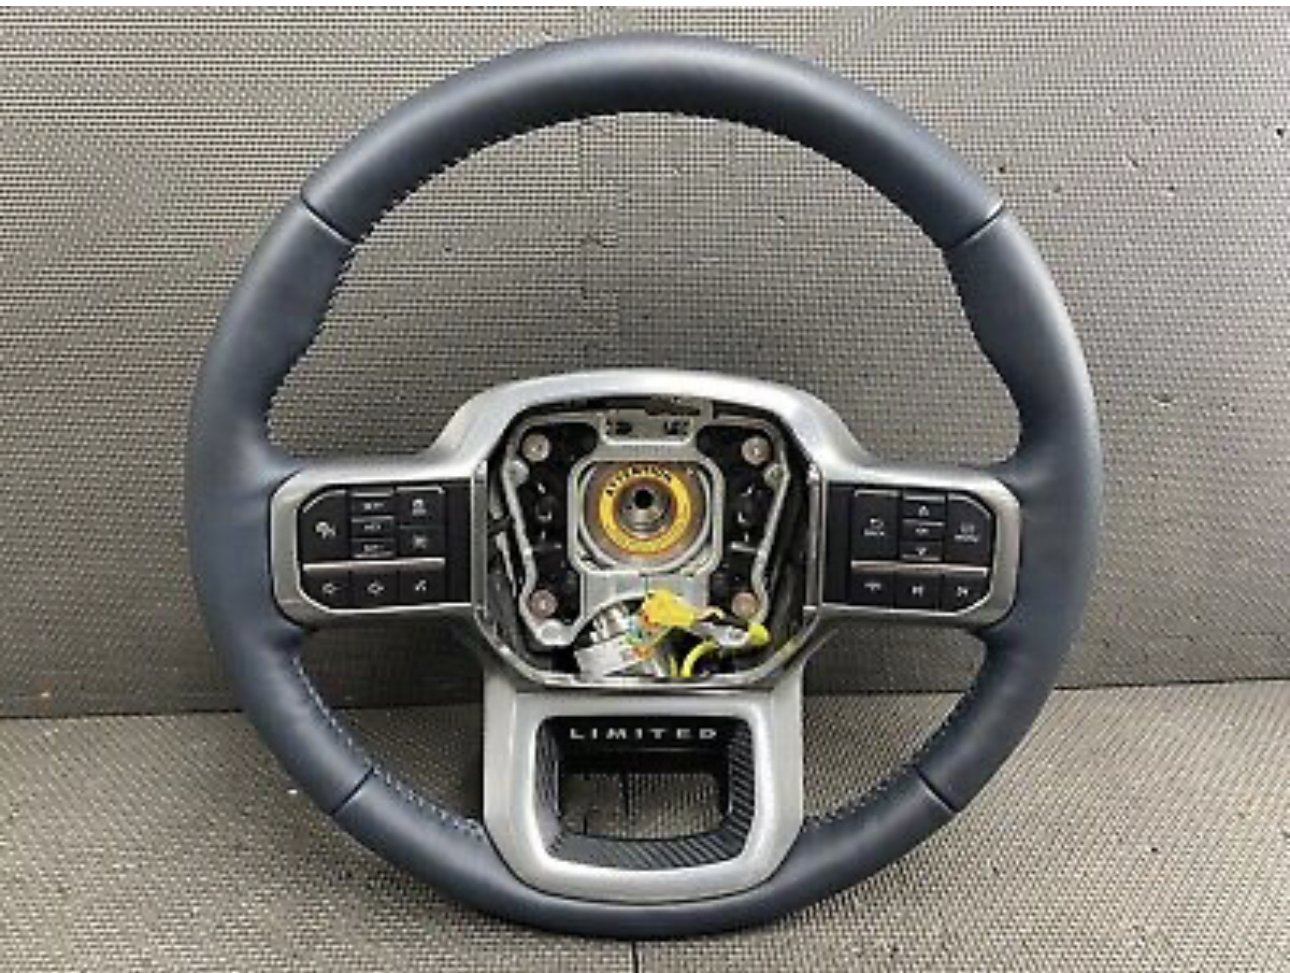 Ford F-150 Raptor Steering wheel Part Number Needed! 00DCF49D-D58B-4AE6-AA01-87E02A97D1BA